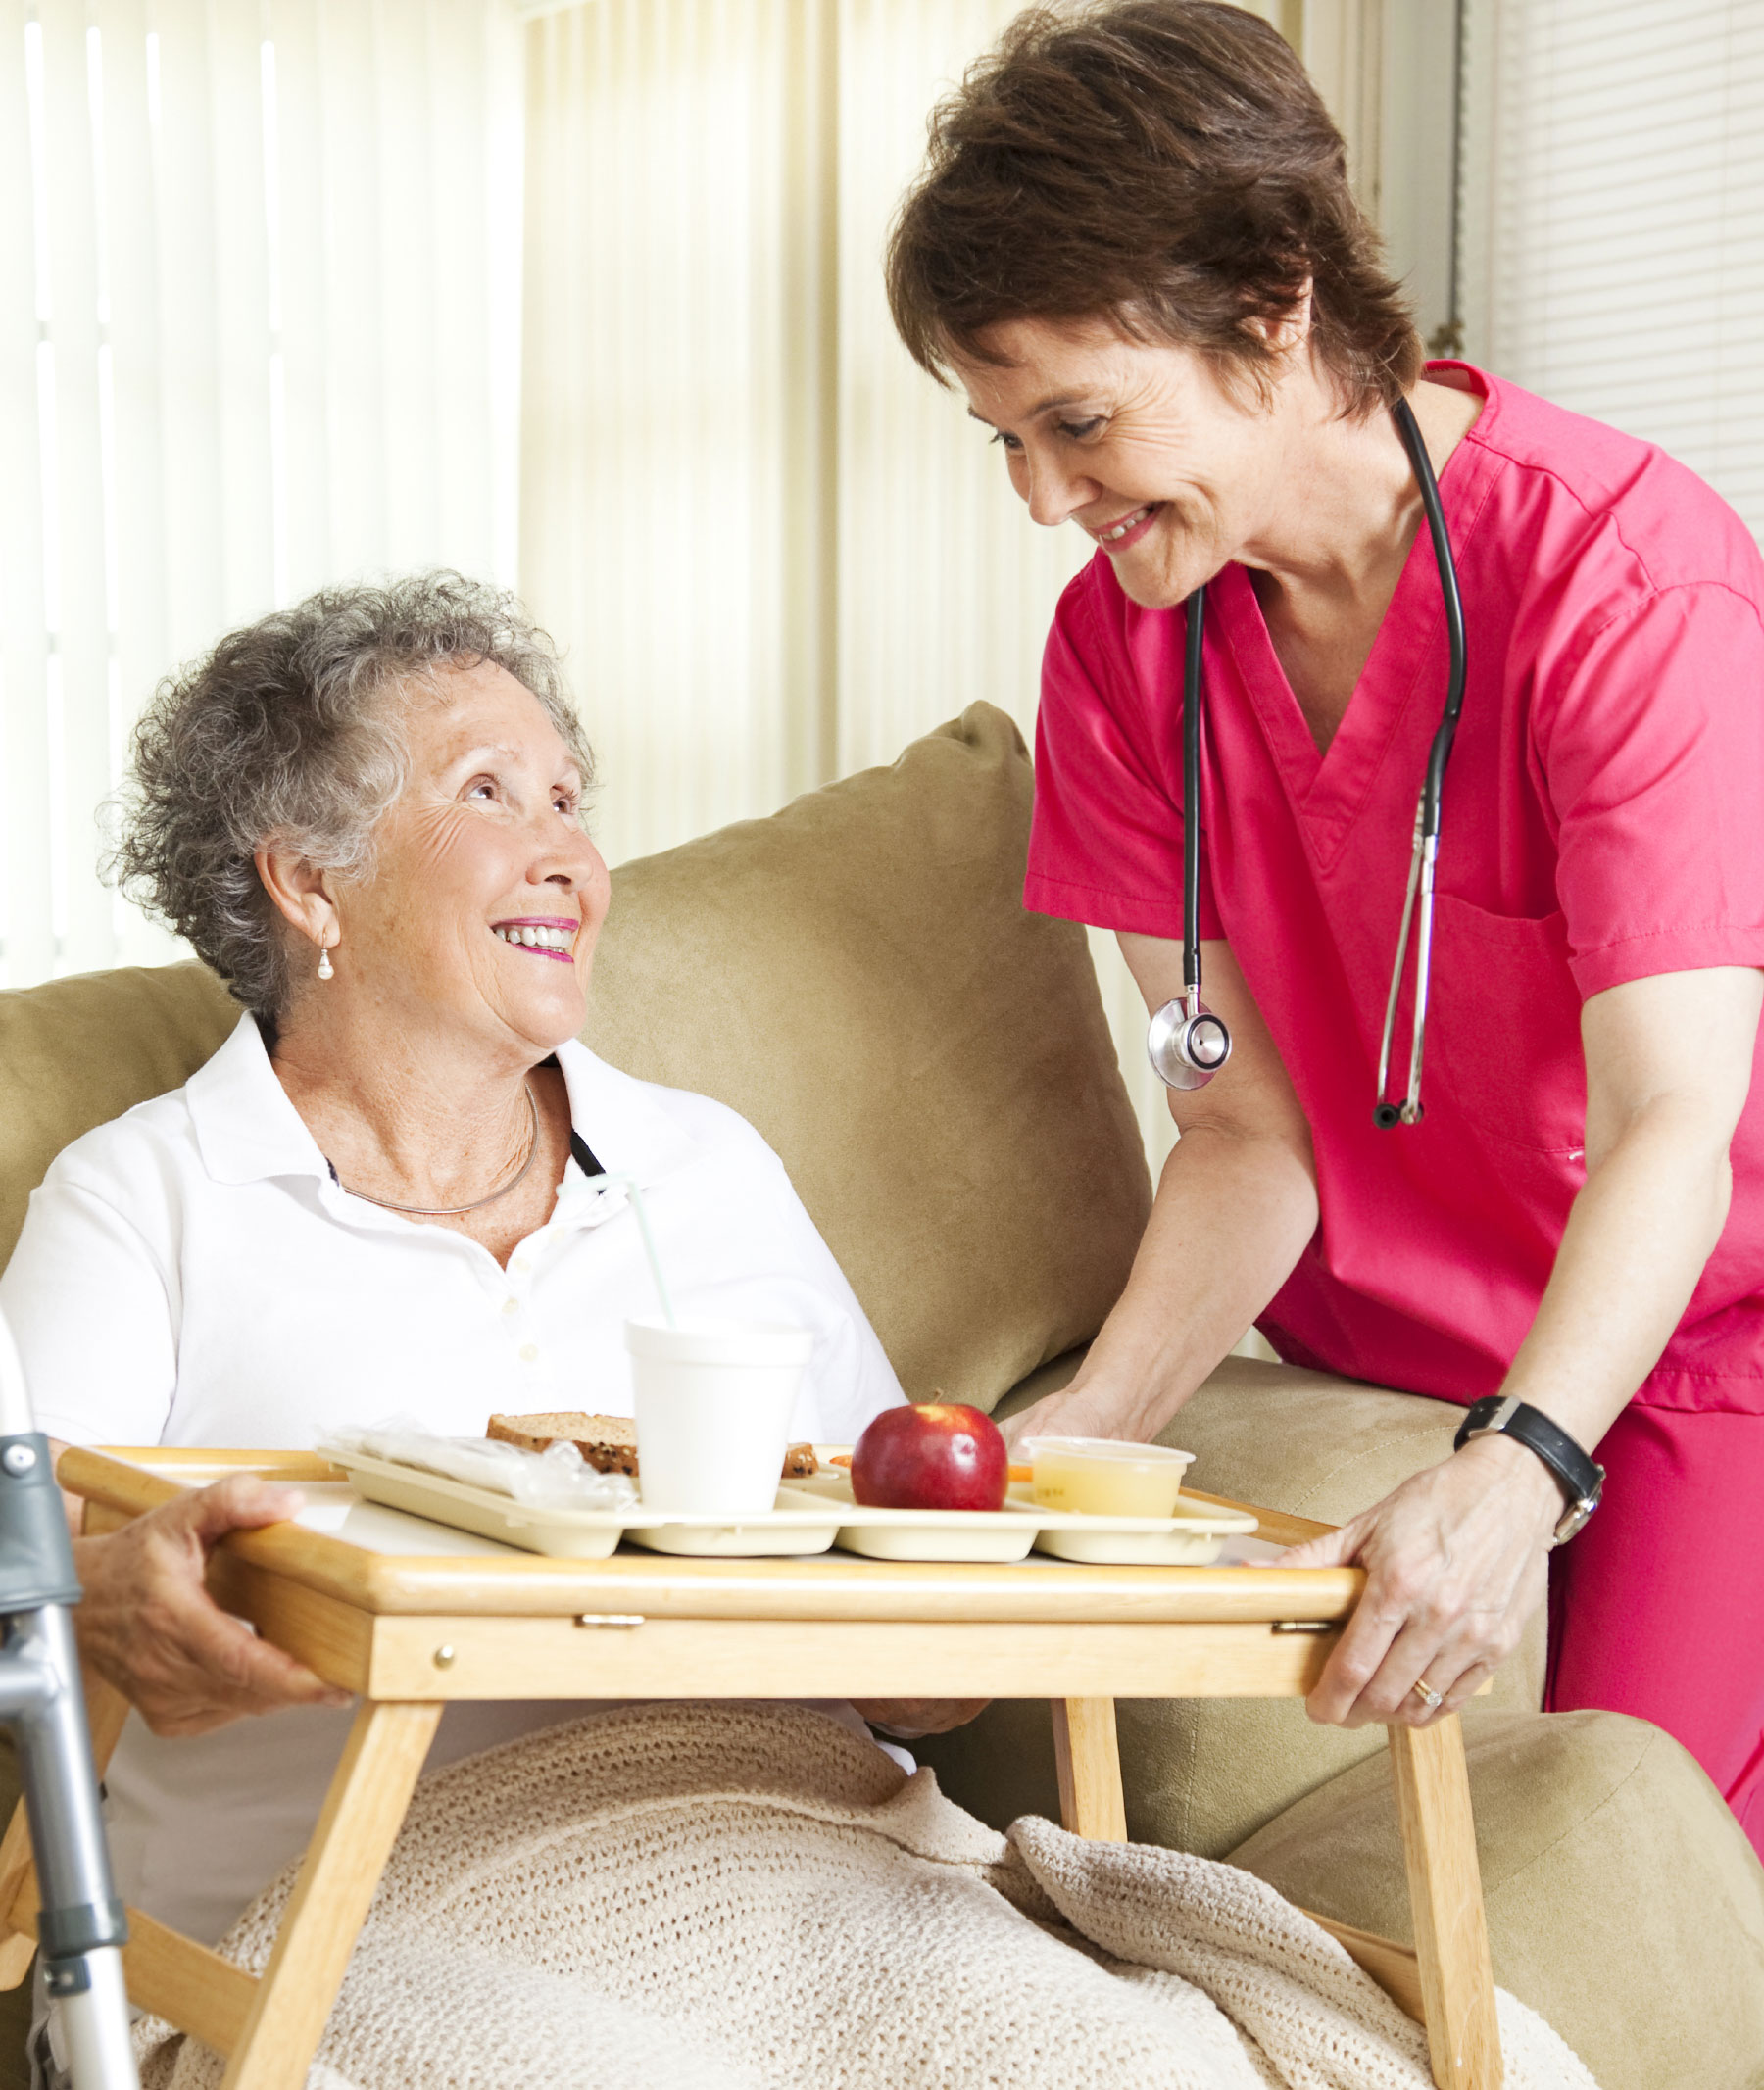 Advanced Care Home Health | LHC Group | We Care For People